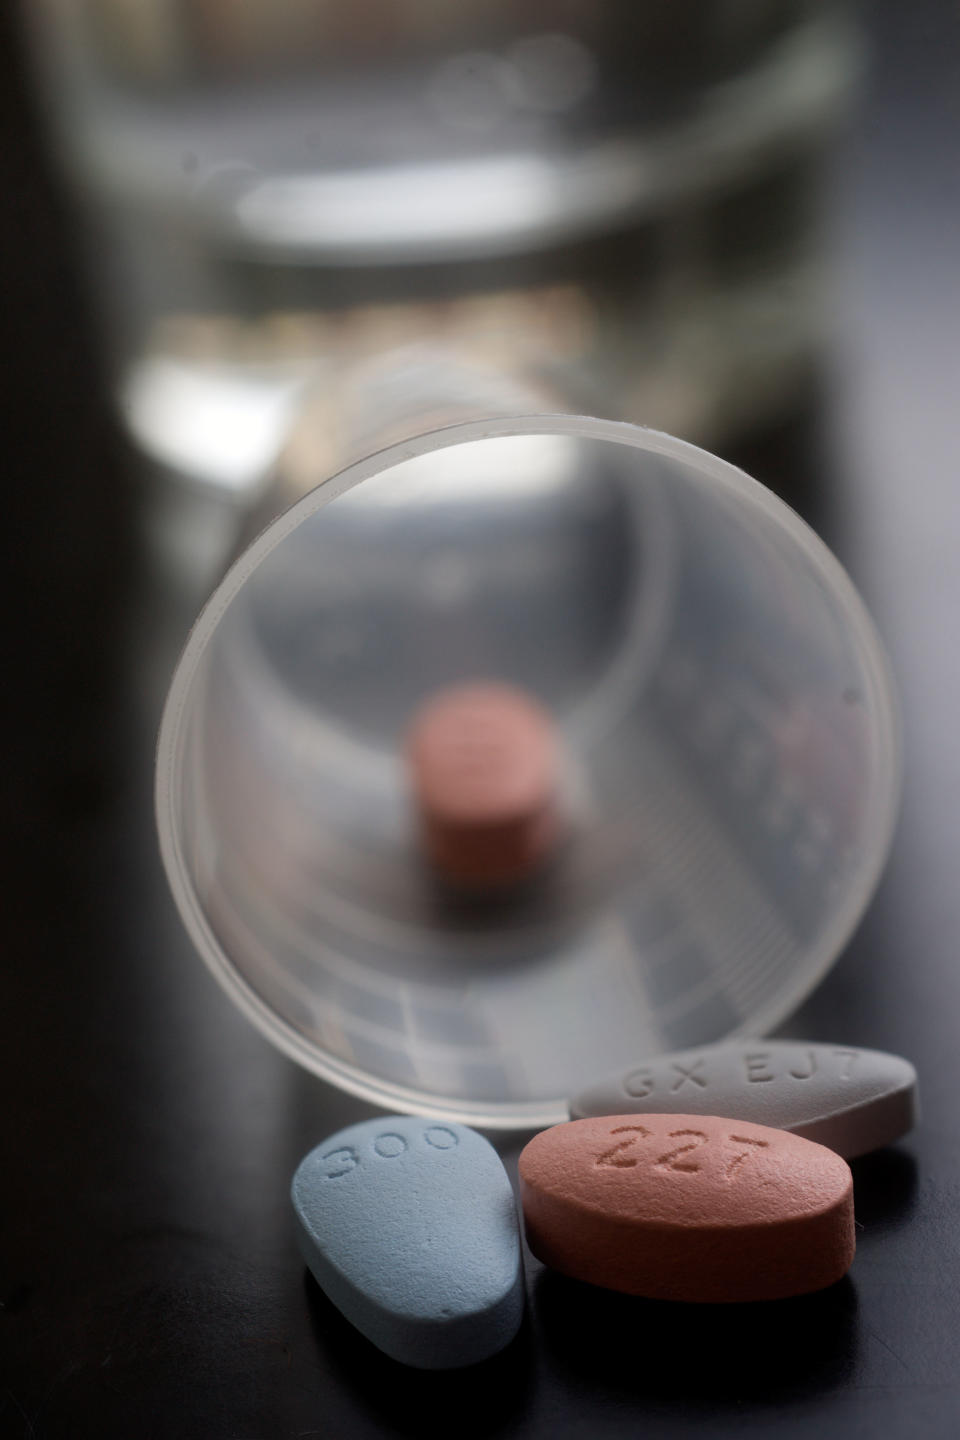 <em>All</em> HIV patients should be <a href="http://healthland.time.com/2012/07/23/new-advice-calls-for-putting-all-hiv-patients-on-drug-treatment/">treated immediately with antiretrovirals</a>, according to new guidelines issued this year from a panel of the International Antiviral Society-USA, as reported by <em>TIME</em>. The recommendations are counter to previous guidelines, which said that antiretrovirals should only be used if the CD4 count -- a measure of immune cells in a person's body -- becomes less than 350 cells for every mm3 of blood. 